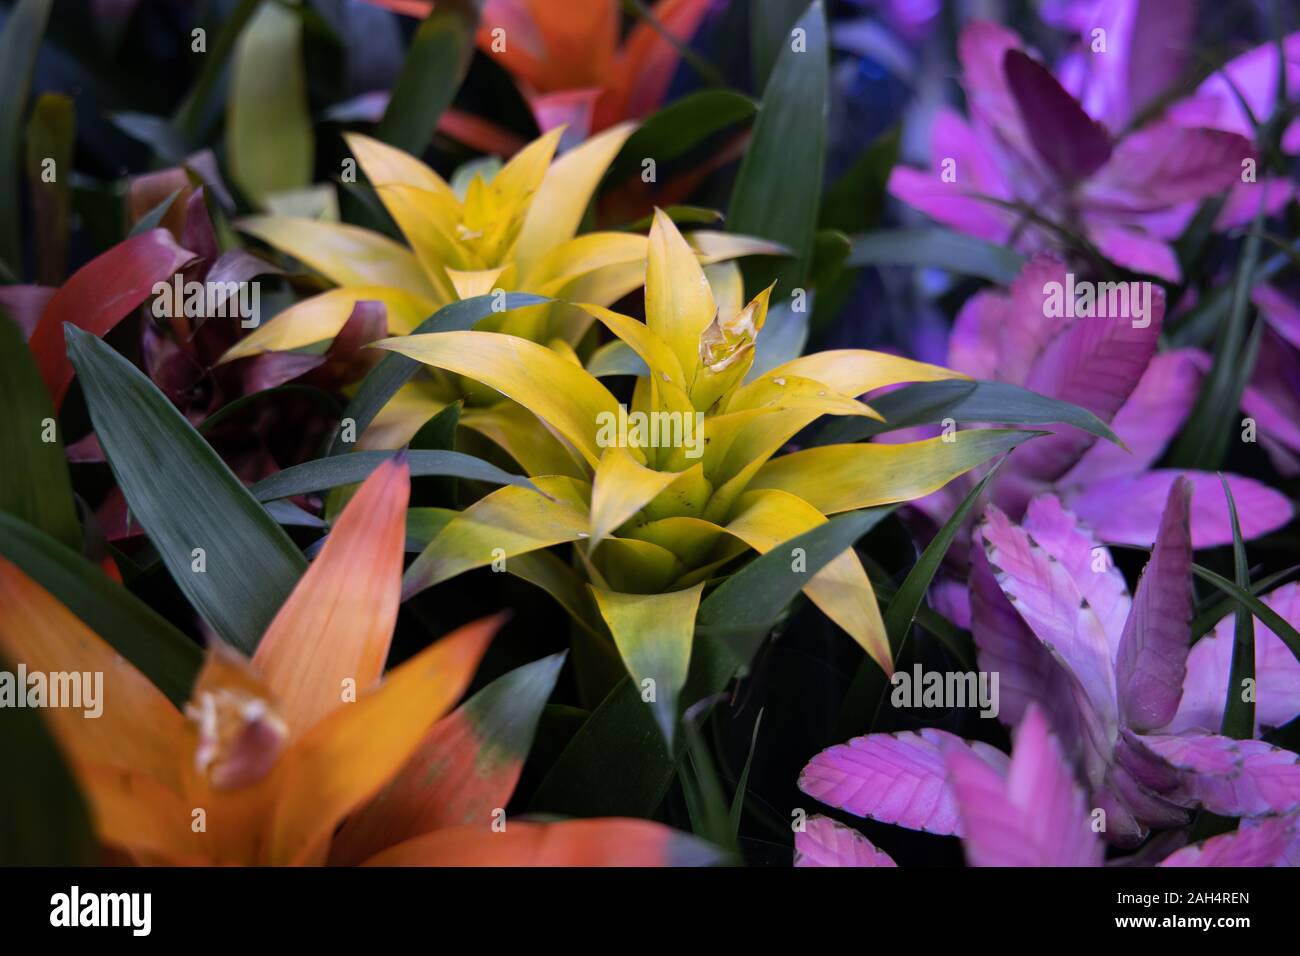 Colorful bromeliad flowers in Colombia Stock Photo